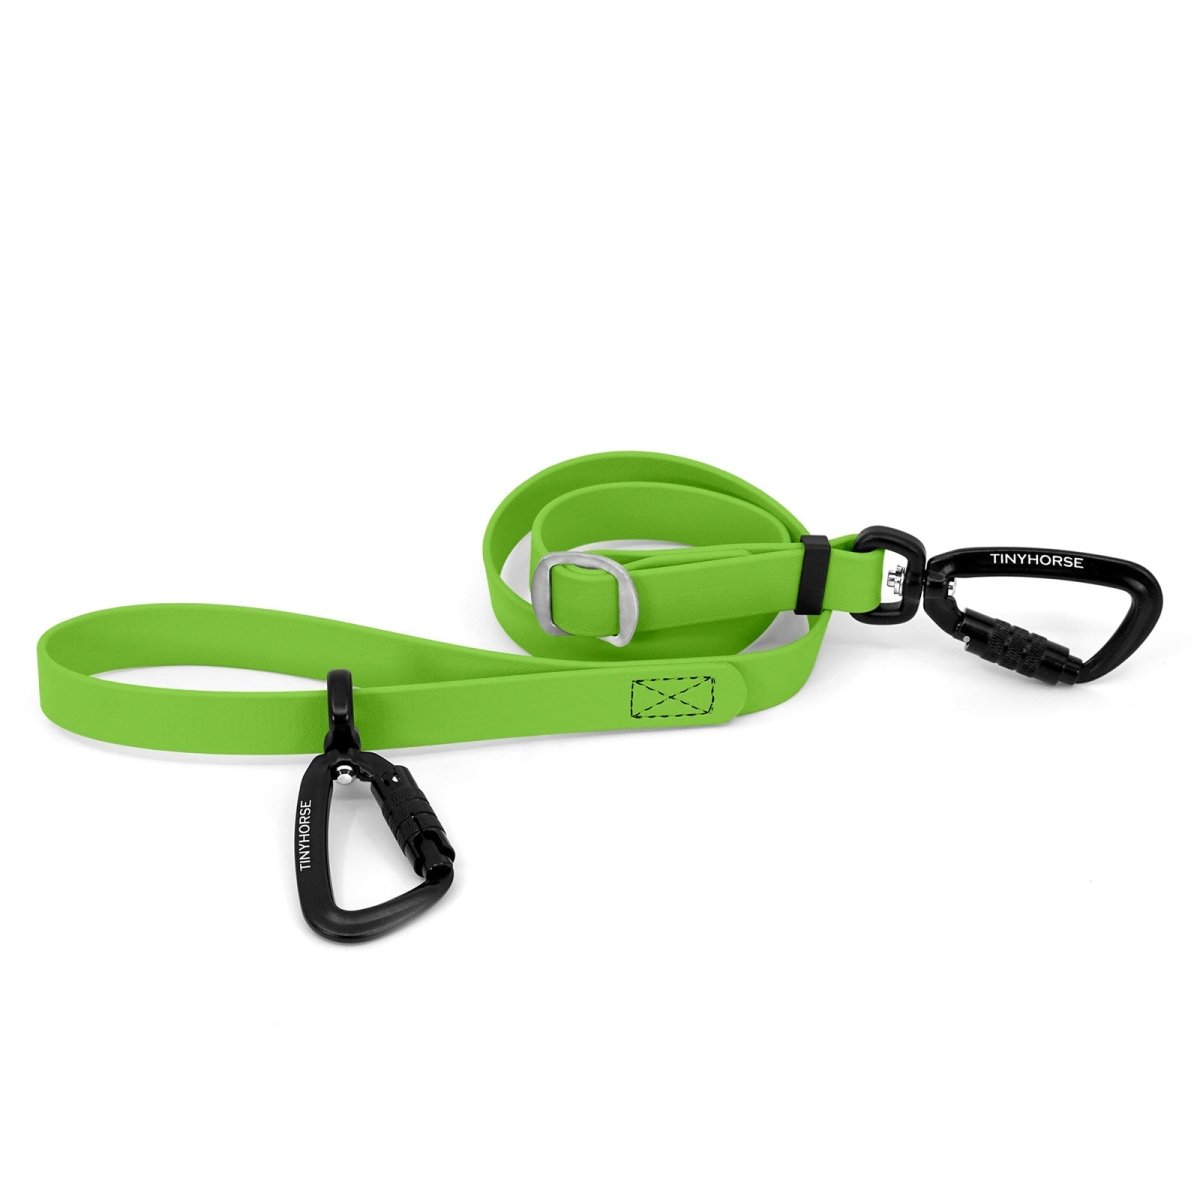 An adjustable key lime-coloured Lead-All Pro made of BioThane with 2 auto-locking carabiners